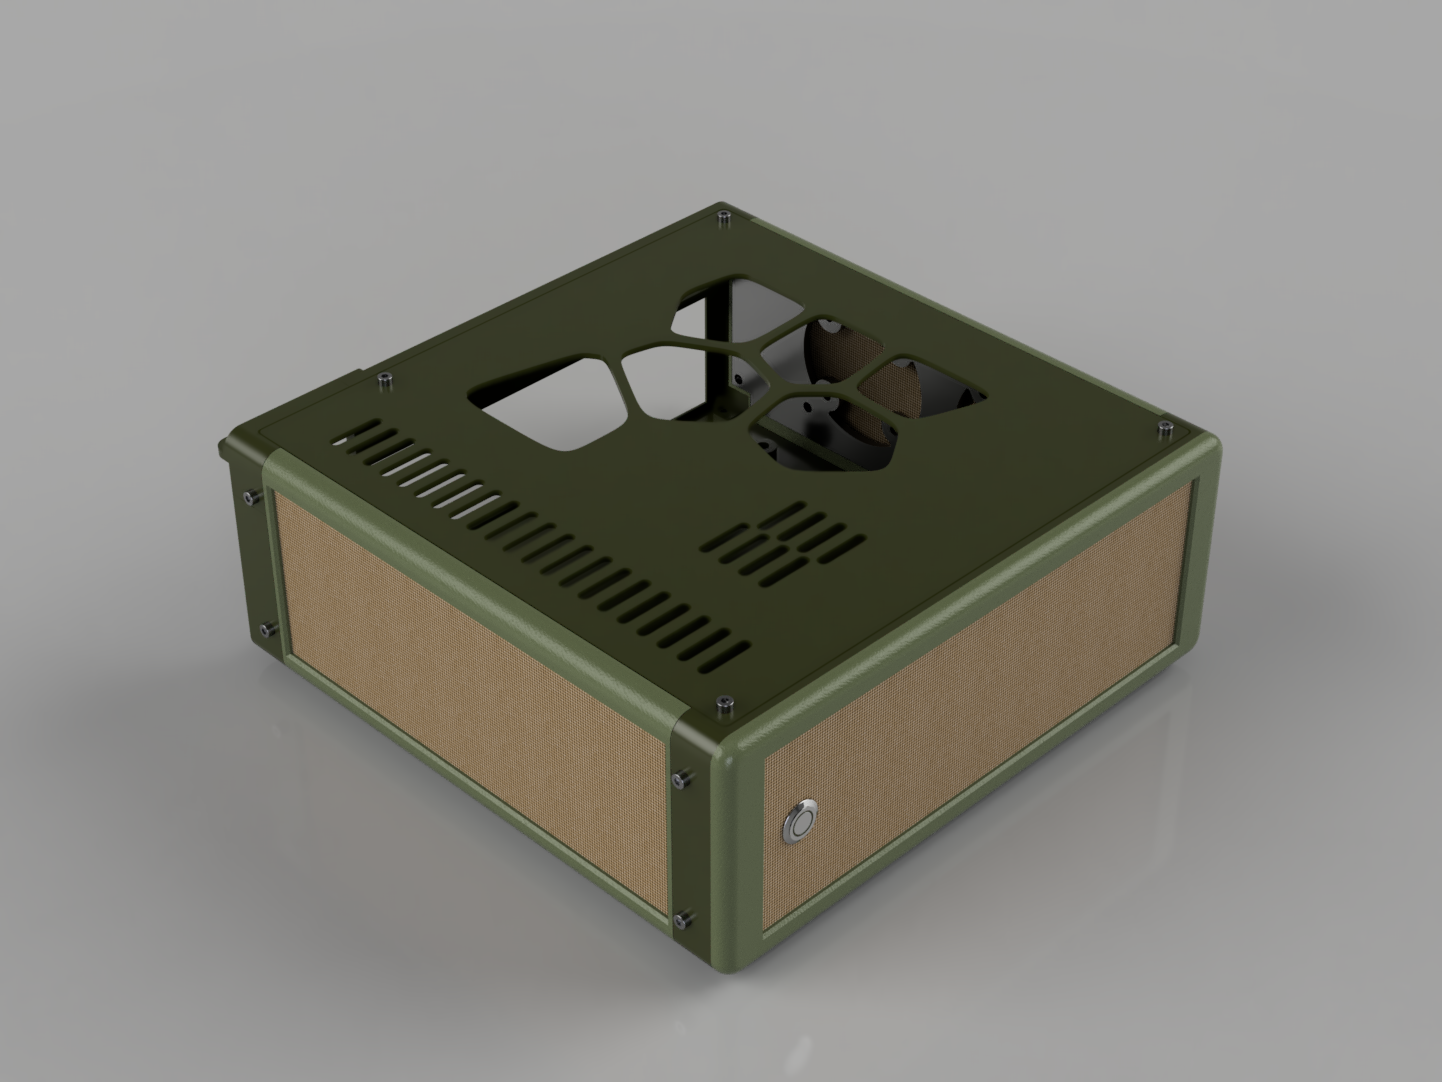 Catapult.LP4 3D Printed 4.0L ITX PC Case - Military Edition